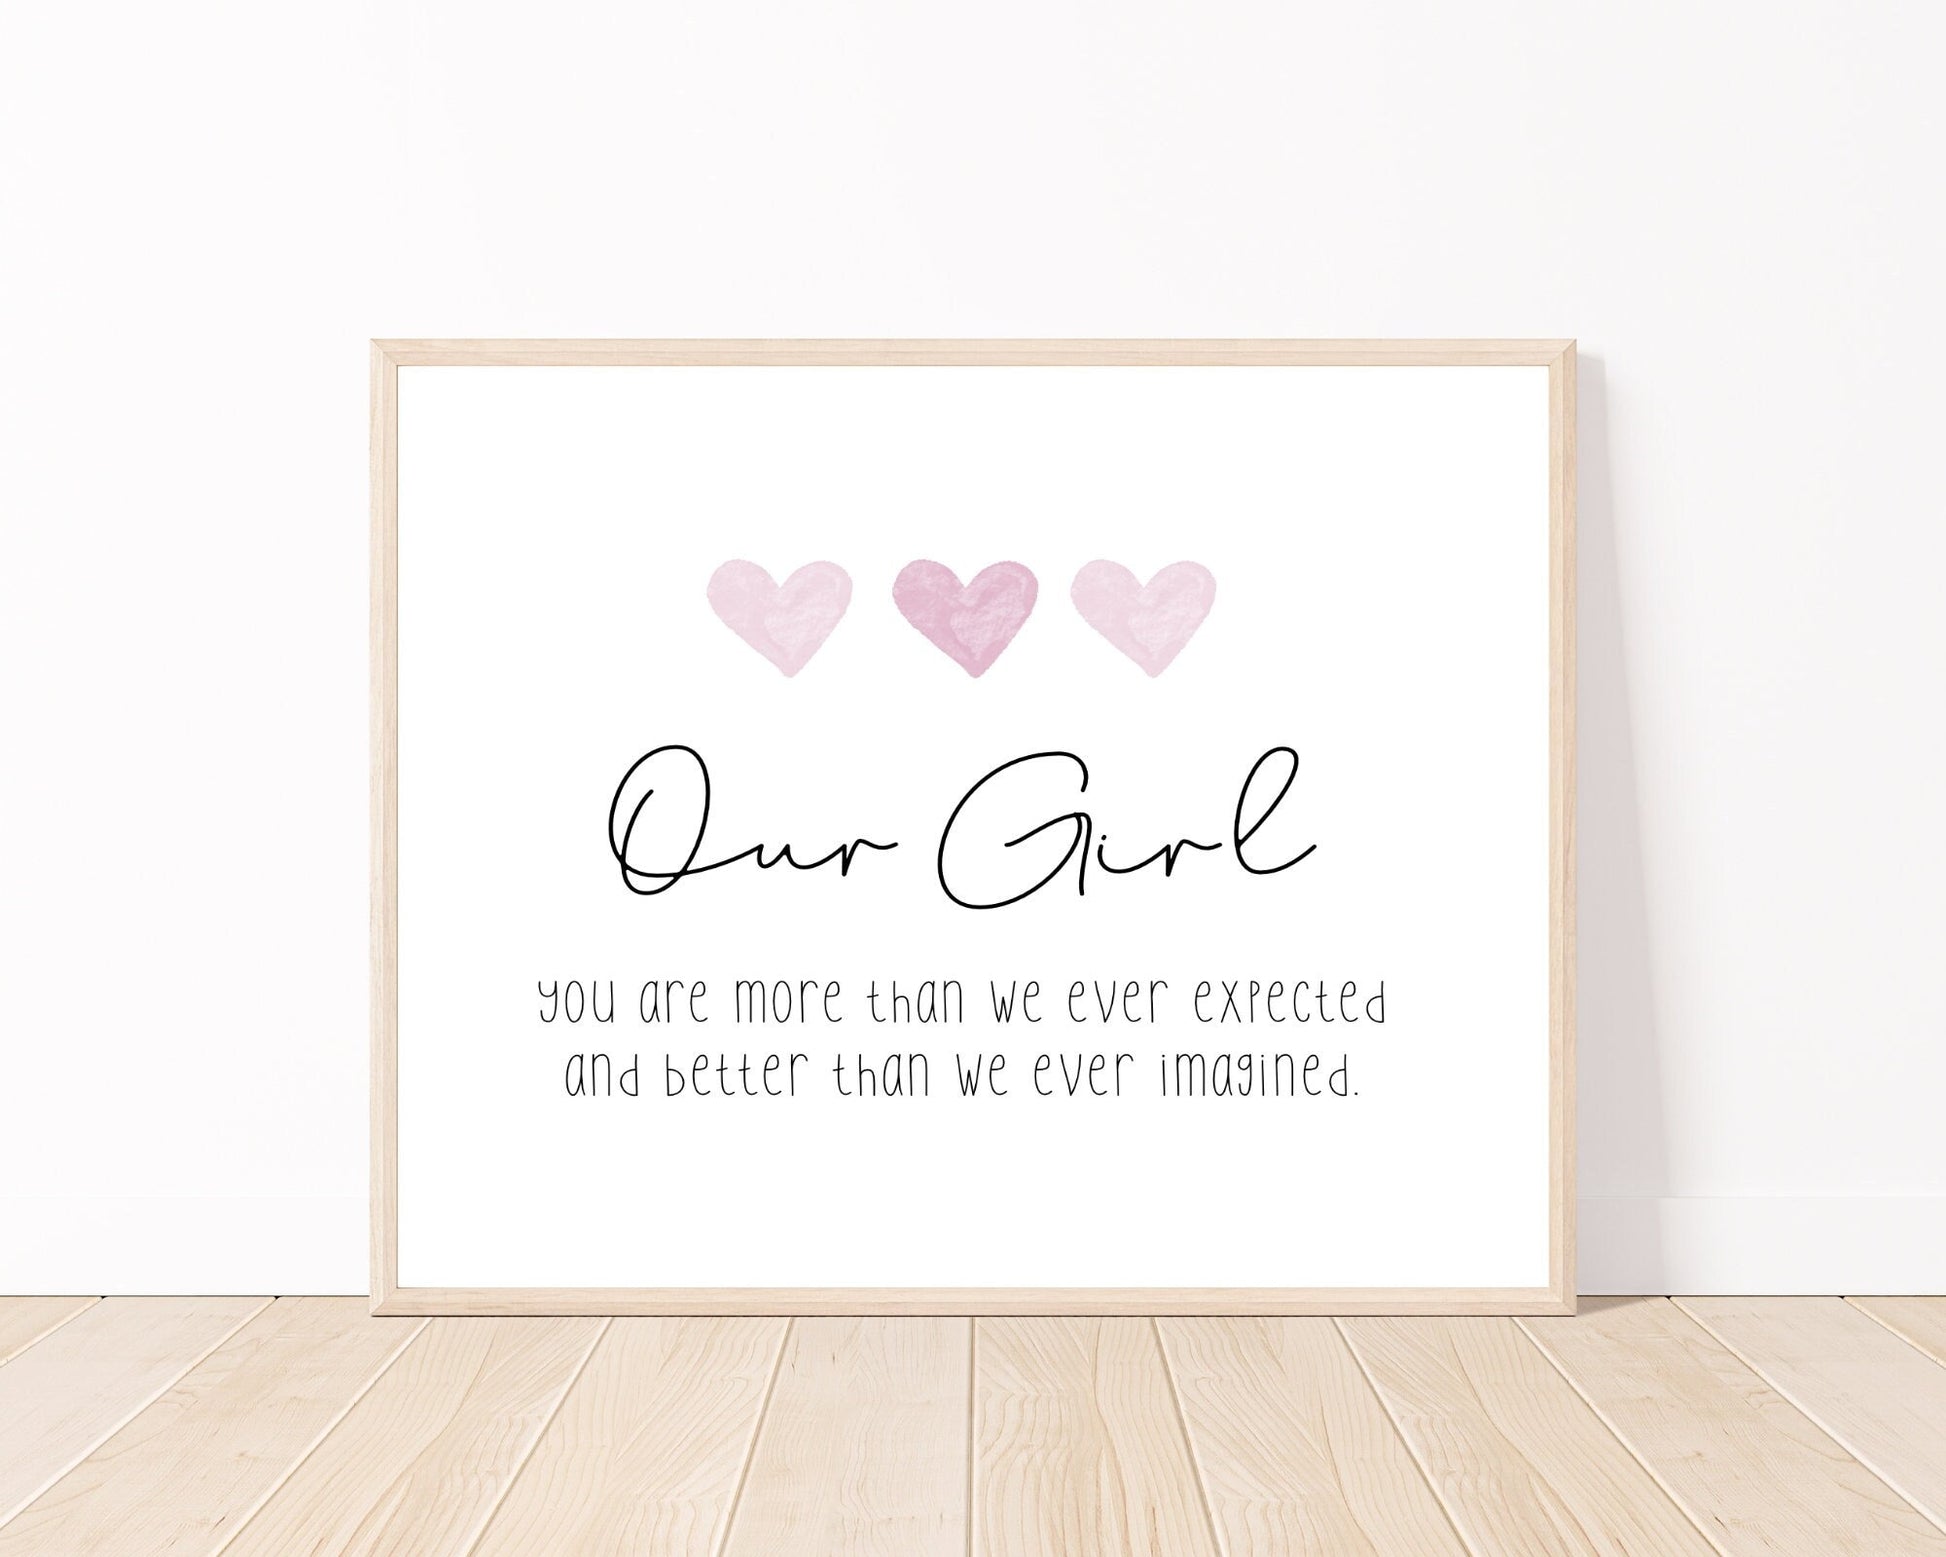 A little girl’s graphic showing three baby pink hearts with a piece of writing below that says: Our girl, you are more than we ever expected, and better than we ever imagined.